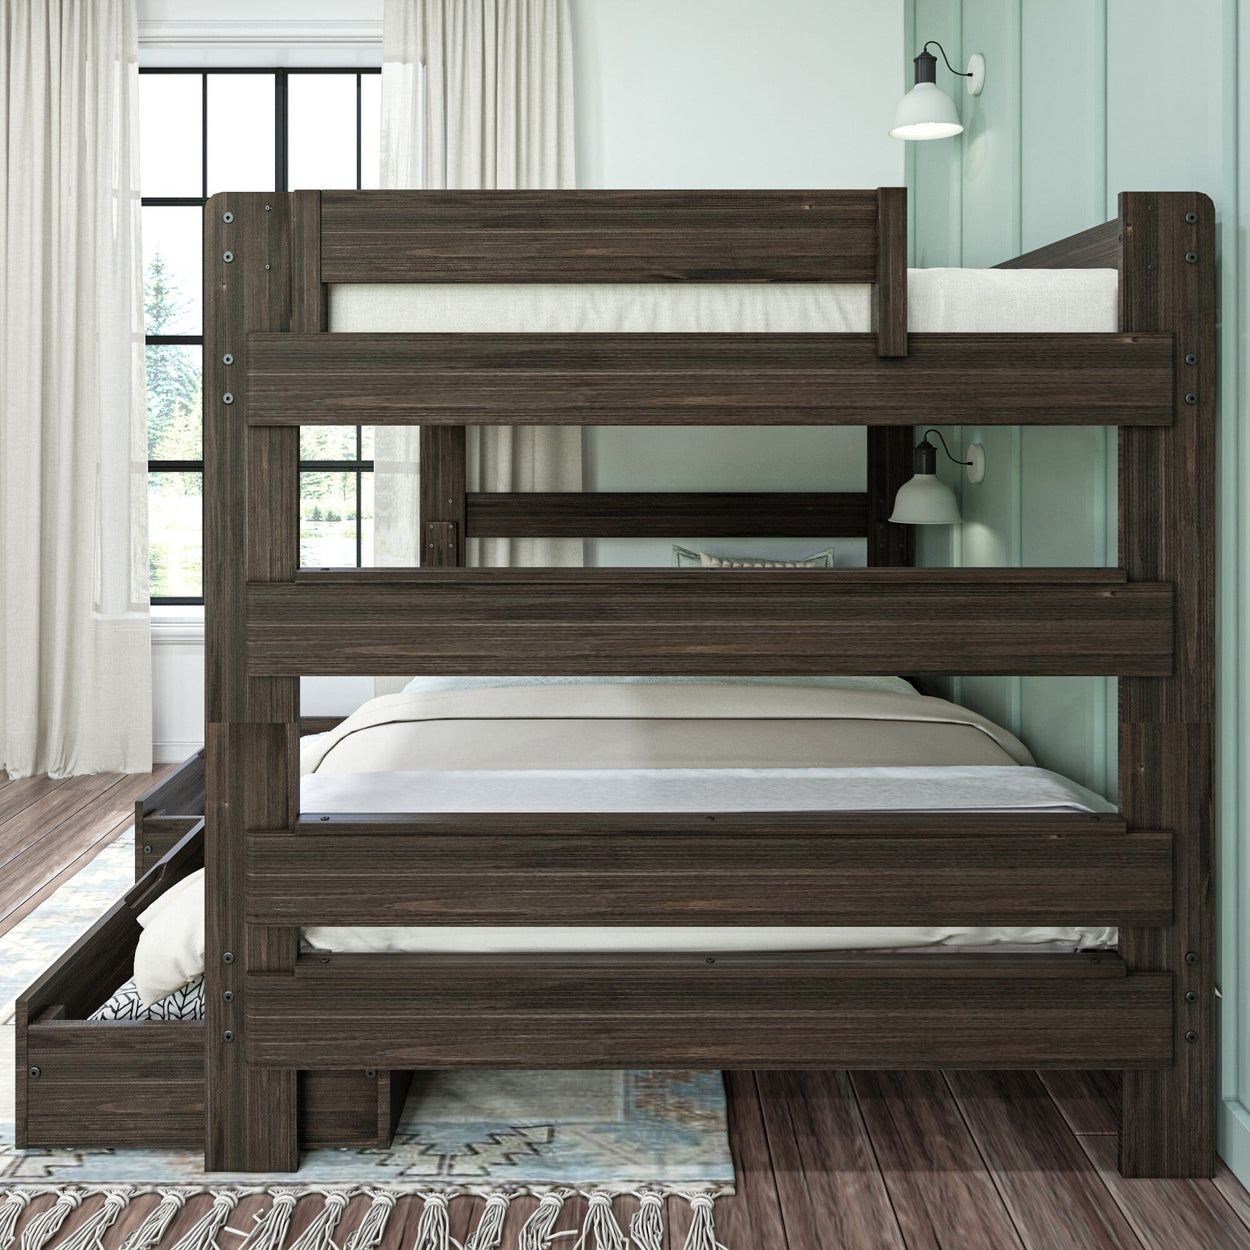 197271-181 : Bunk Beds Farmhouse Queen over Queen Bunk Bed with Storage Drawers, Barnwood Brown